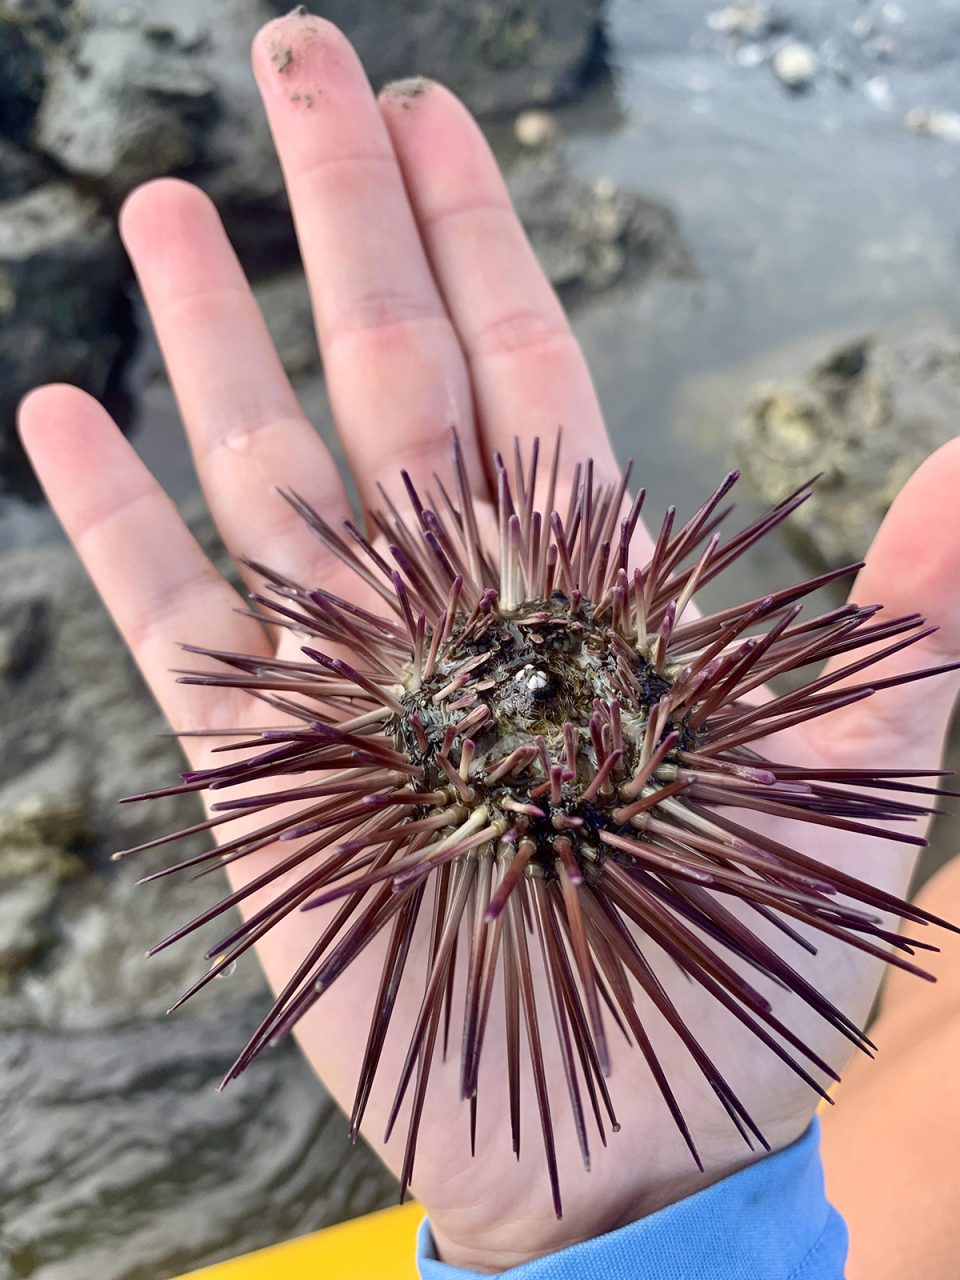 The urchin’s intricate shape and formidable appearance could convince me this creature terrifies its prey. Photo: Jillian Daly